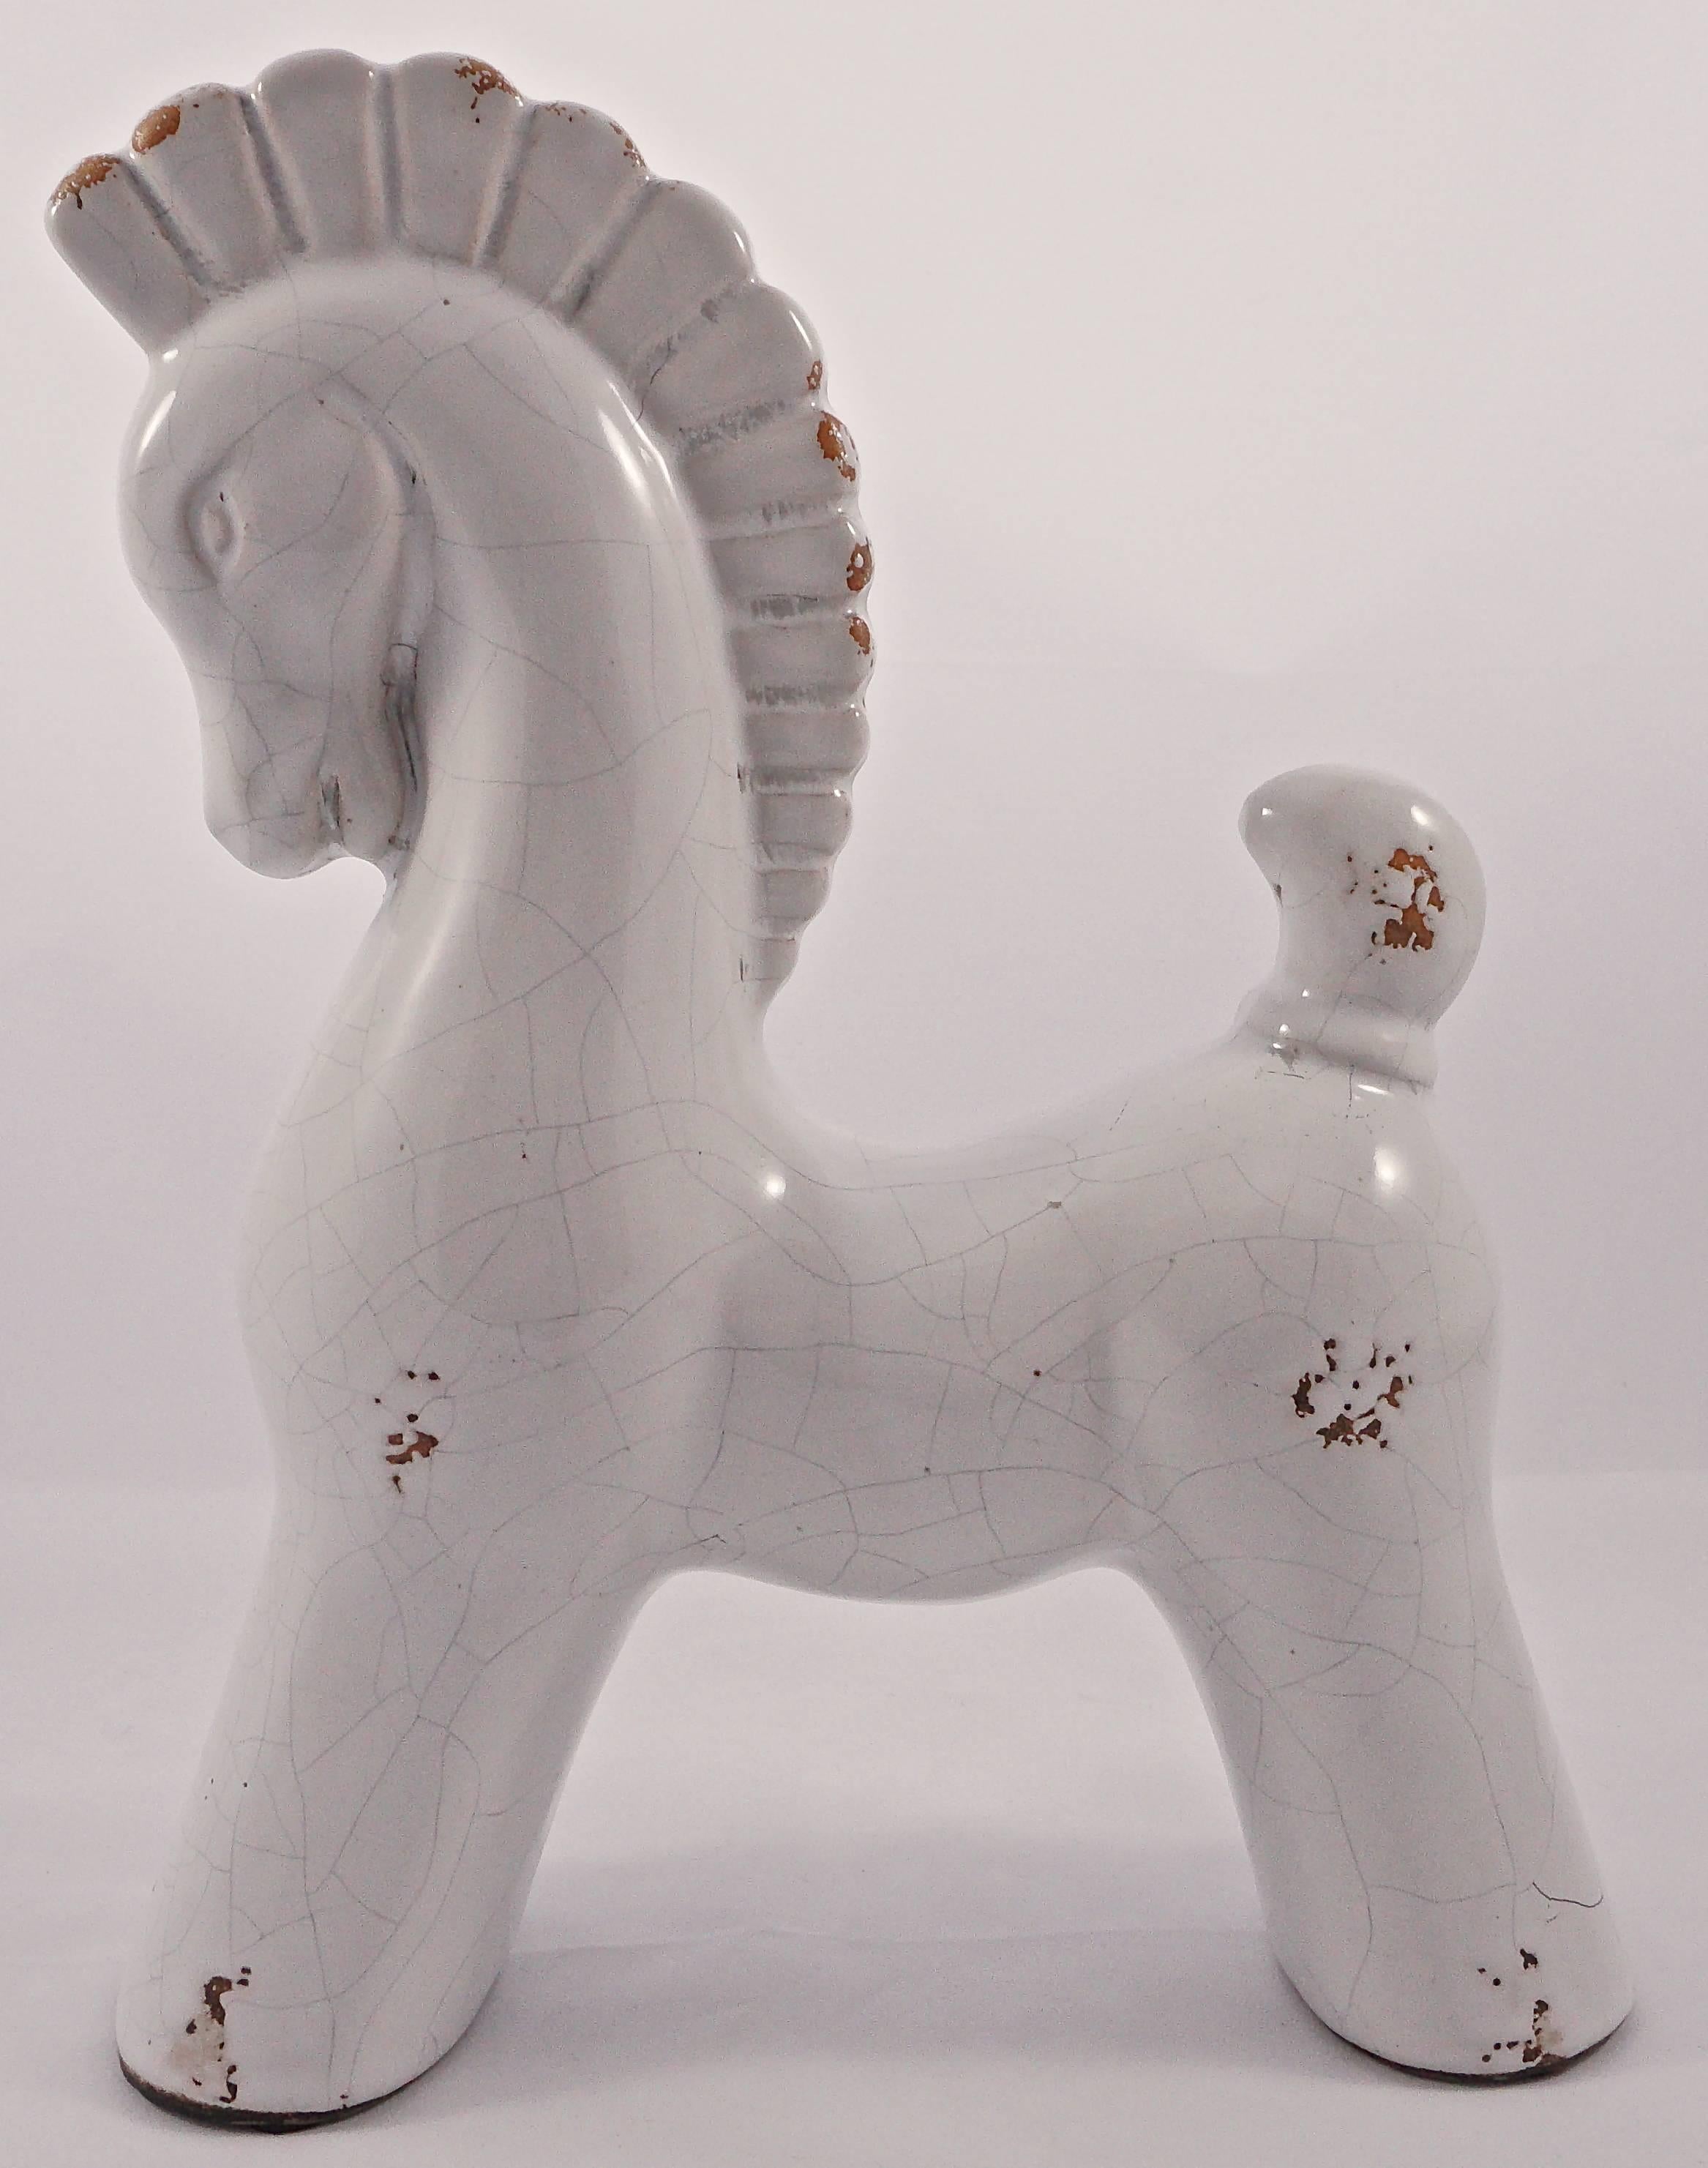 Stylized large white crackle glaze pottery horse, with speckling that exposes the ceramic beneath. It is in very good condition. The horse is height 27.2cm, 10.7 inches, width 22cm, 8.6 inches, and depth 7.6cm, 3 inches.

Do you know someone who